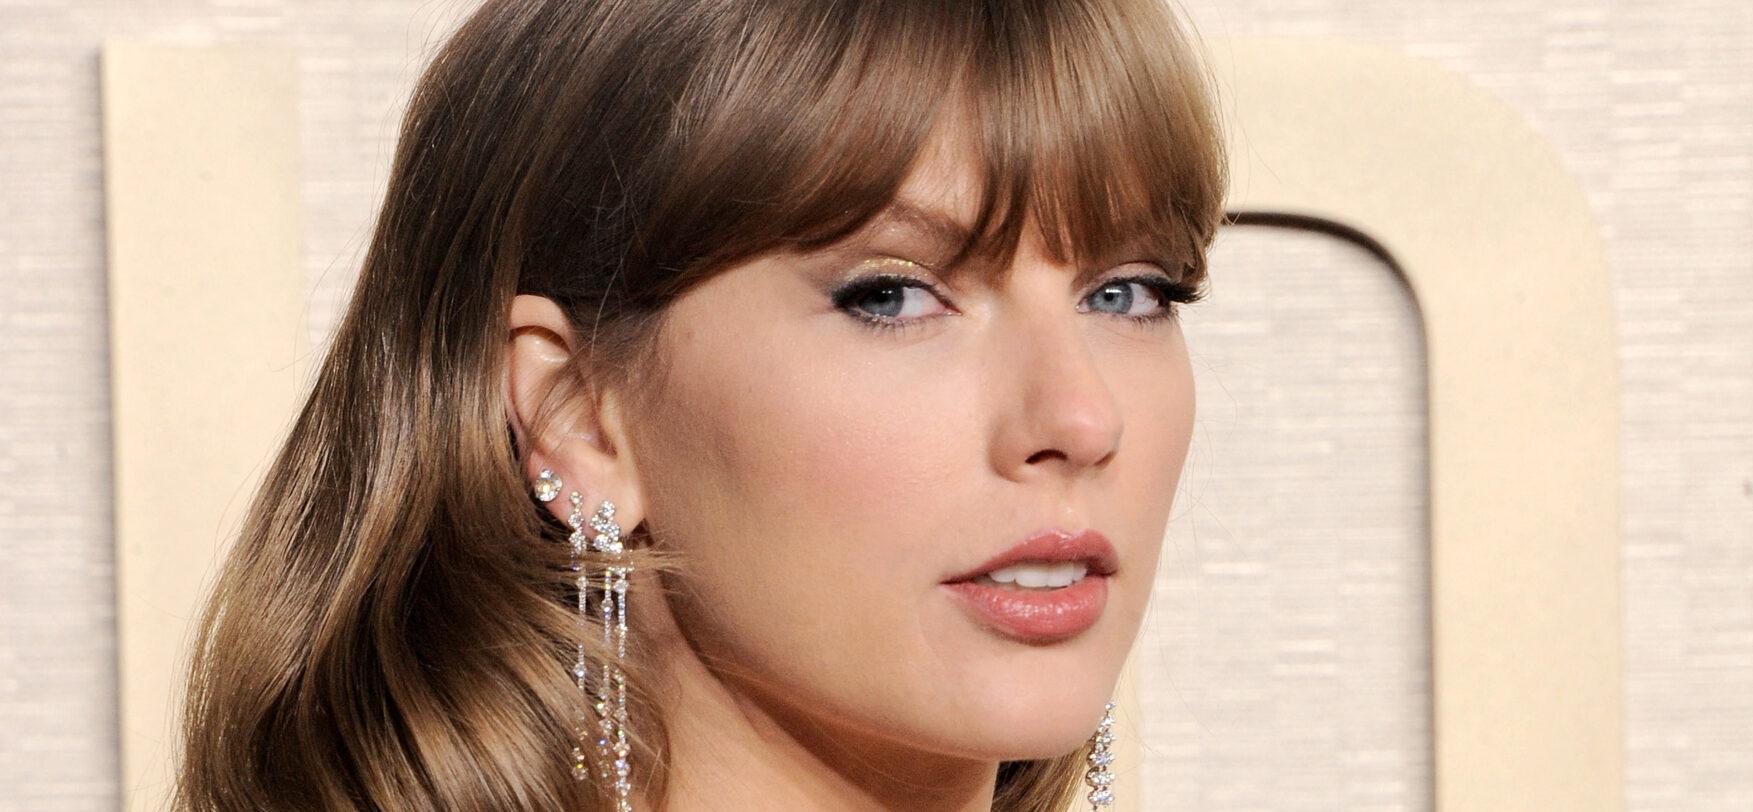 Powerhouse Attorney Offers To Represent Taylor Swift Amid X-Rated AI Photos